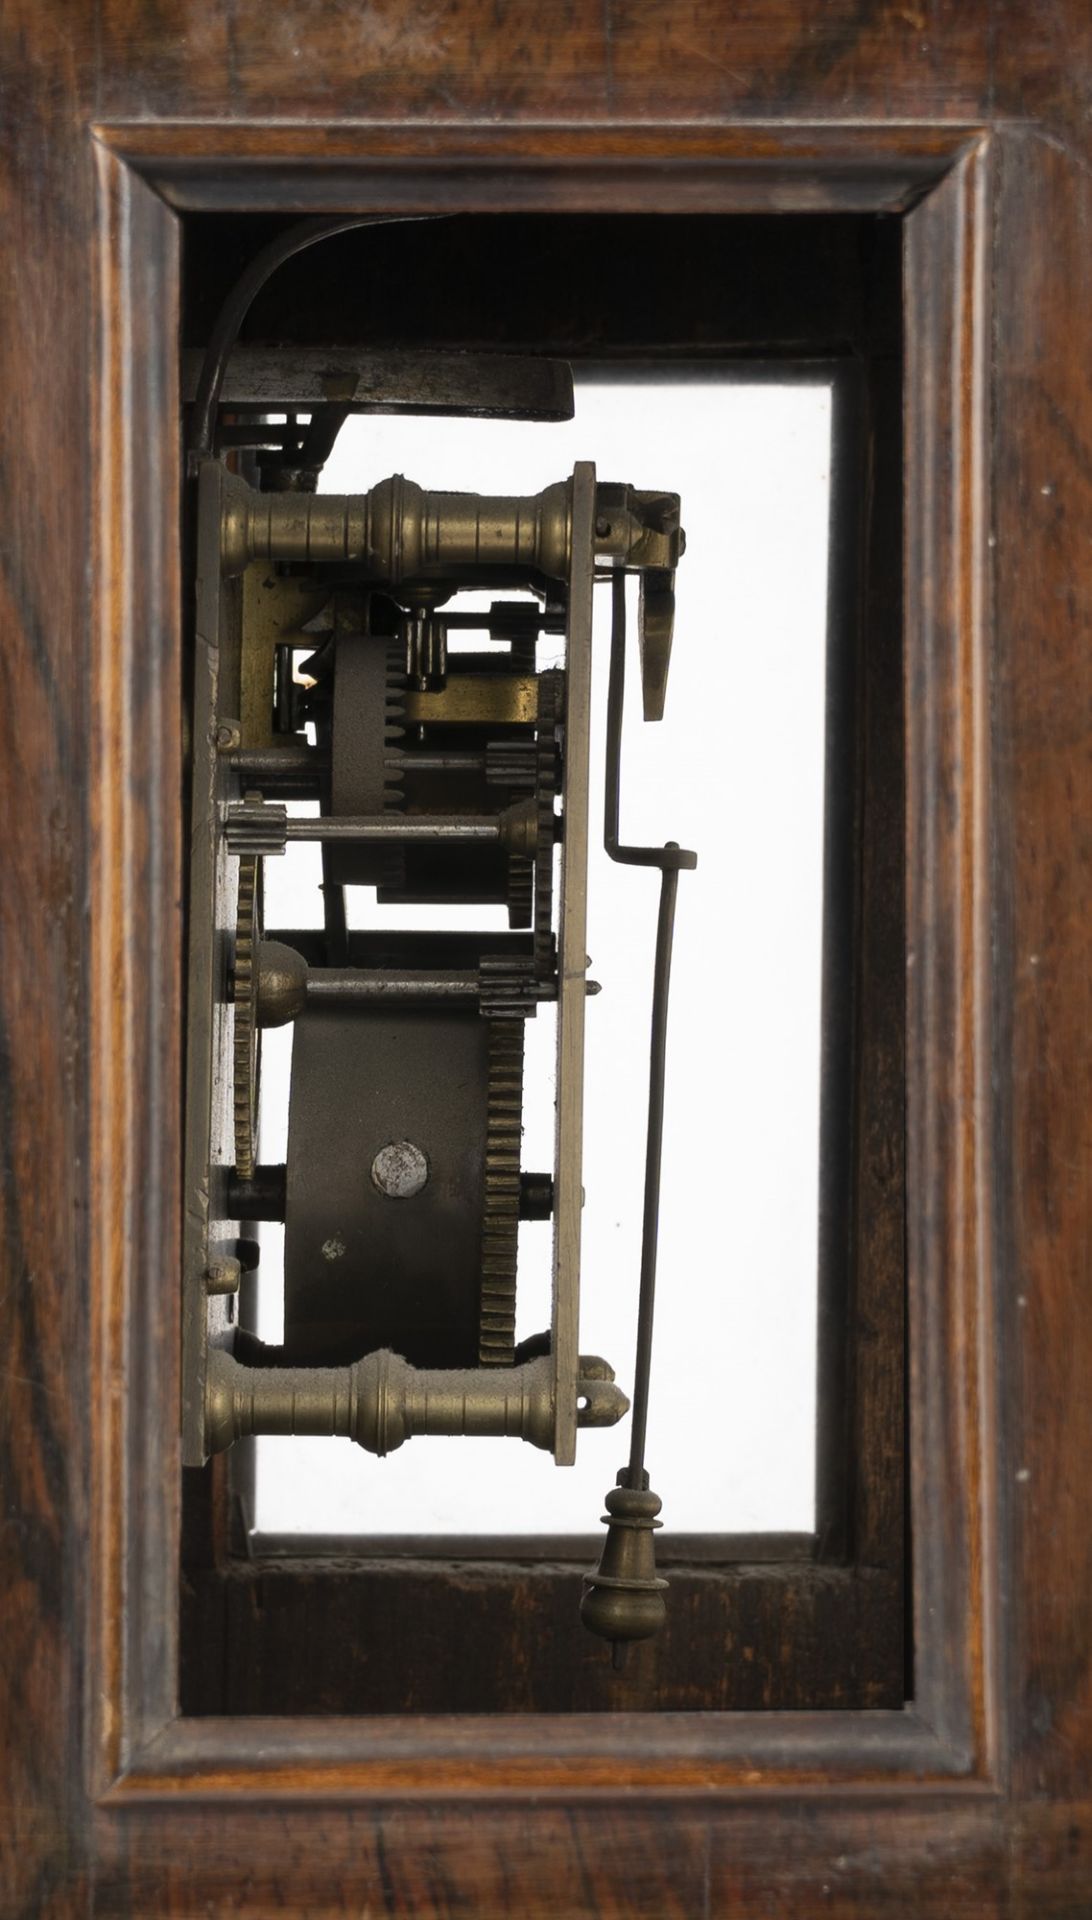 Table clock in wood and bronze, 18th century - Image 8 of 8